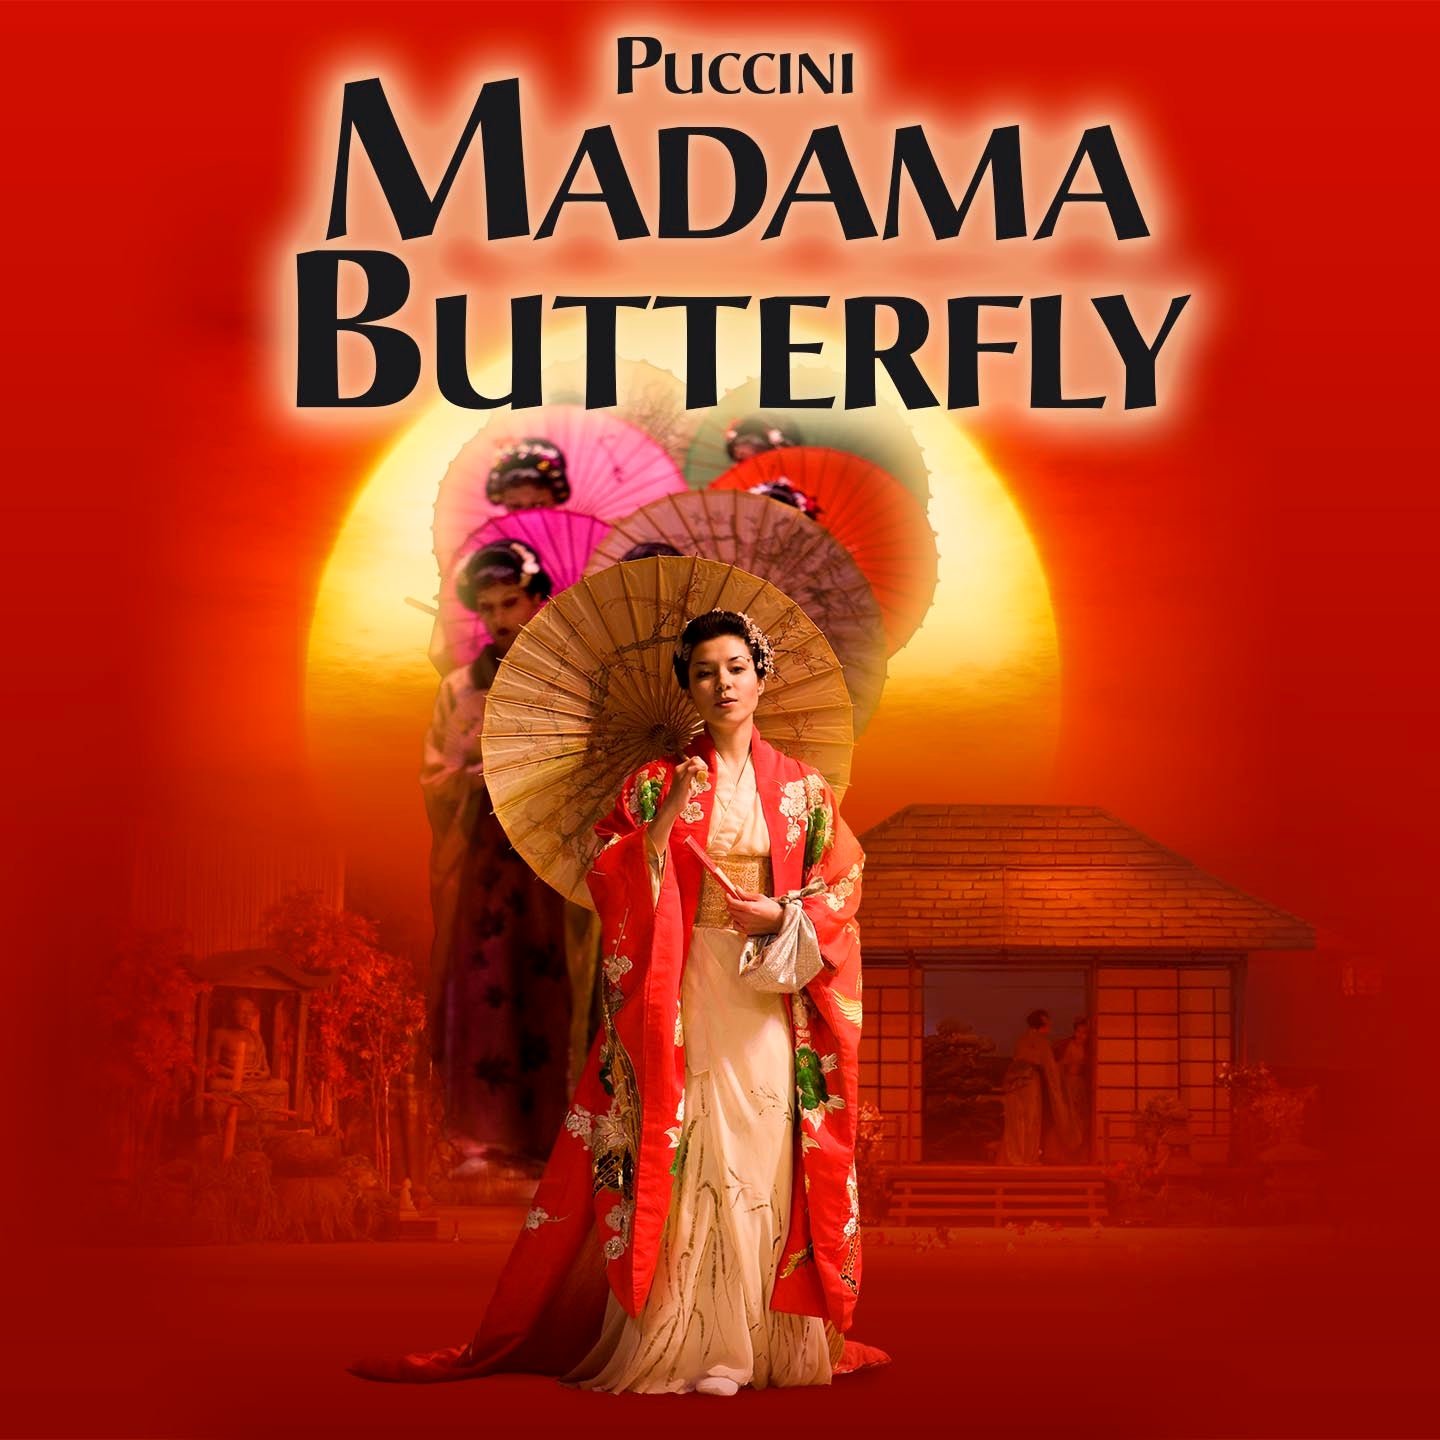 Image name Ellen Kents Madama Butterfly at Hull City Hall Hull the 11 image from the post Ellen Kent's - MADAMA BUTTERFLY at Grand Opera House, York, York in Yorkshire.com.